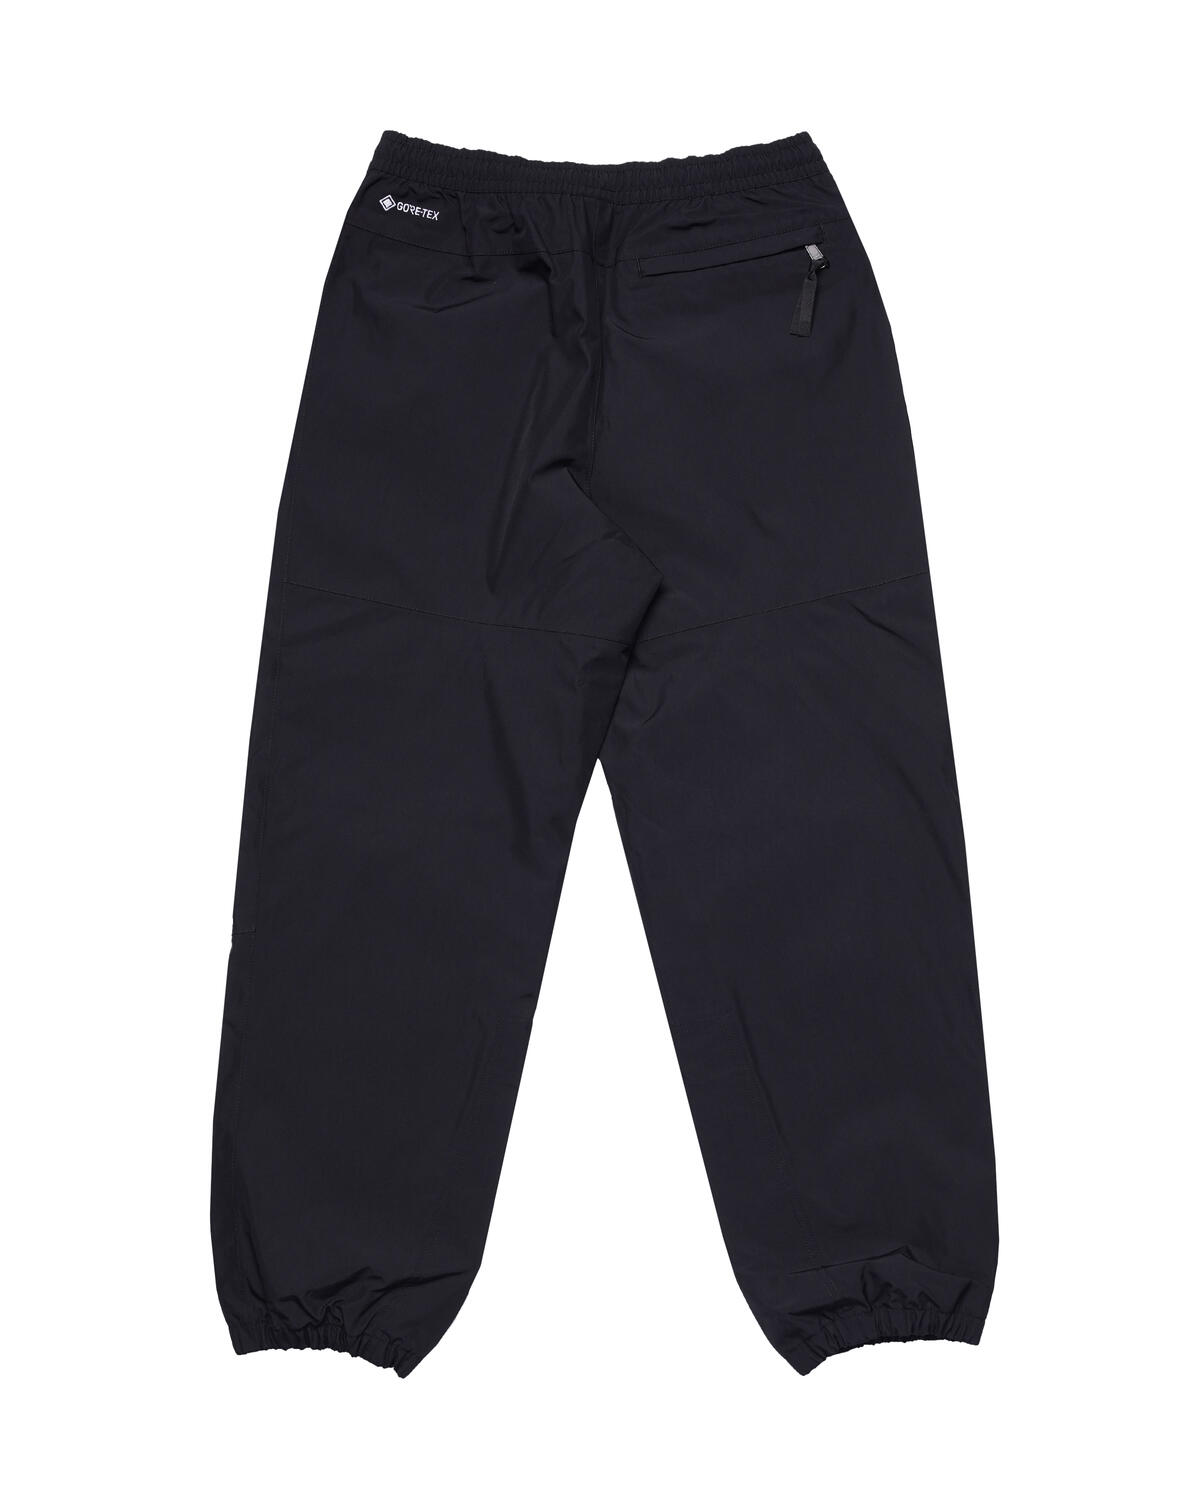 Outdoor Life Vintage Track Pants Rab Gore Tex Outdoor Life | Grailed